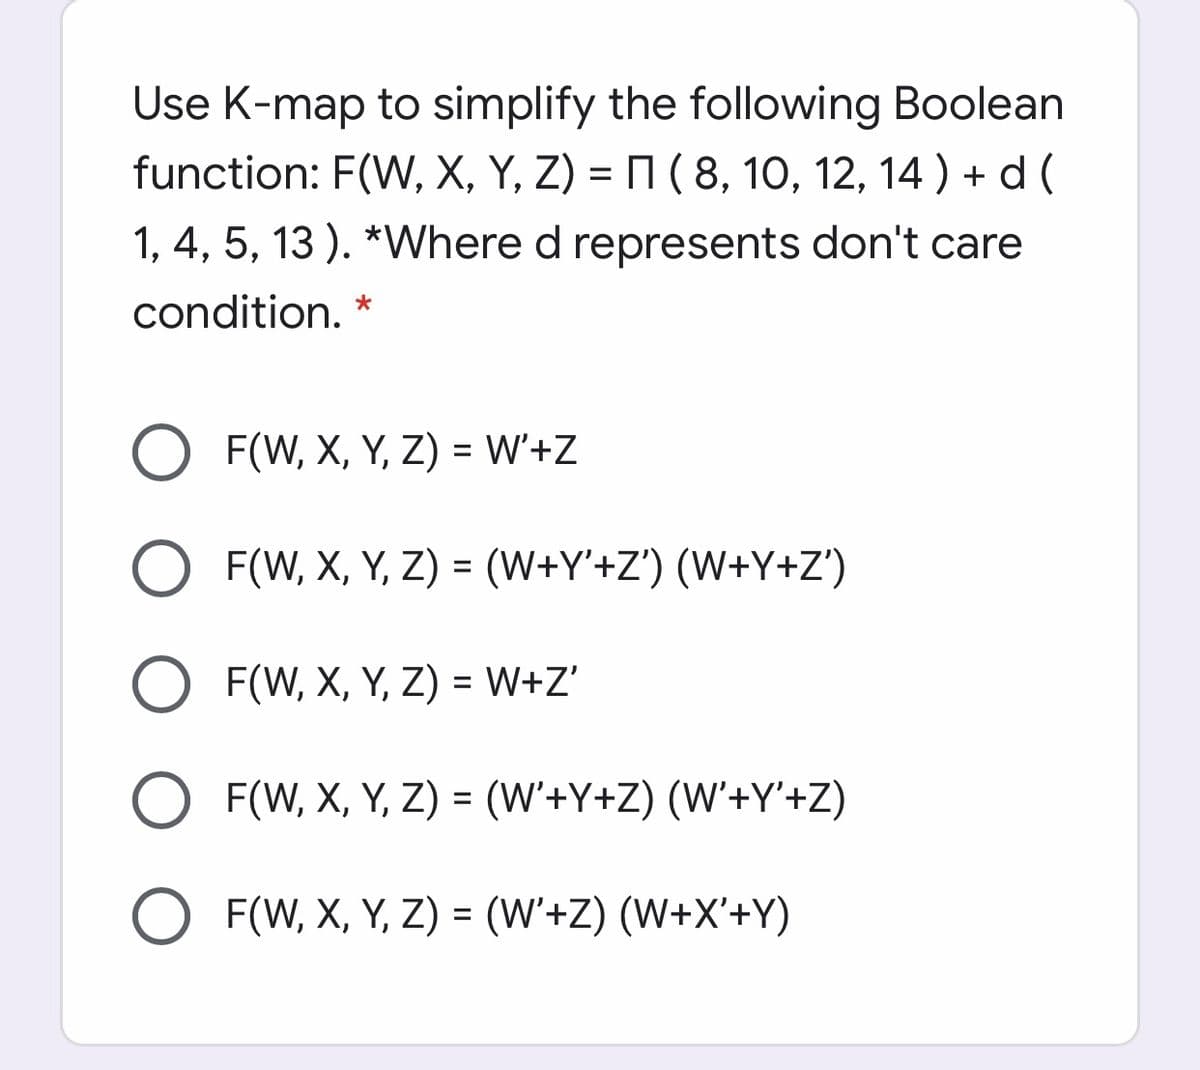 Use K-map to simplify the following Boolean
function: F(W, X, Y, Z) = M ( 8, 10, 12, 14 ) + d (
1, 4, 5, 13 ). *Where d represents don't care
condition.
F(W, X, Y, Z) = W'+Z
F(W, X, Y, Z) = (W+Y'+Z') (W+Y+Z')
F(W, X, Y, Z) = W+Z'
F(W, X, Y, Z) = (W'+Y+Z) (W'+Y'+Z)
F(W, X, Y, Z) = (W'+Z) (W+X'+Y)
